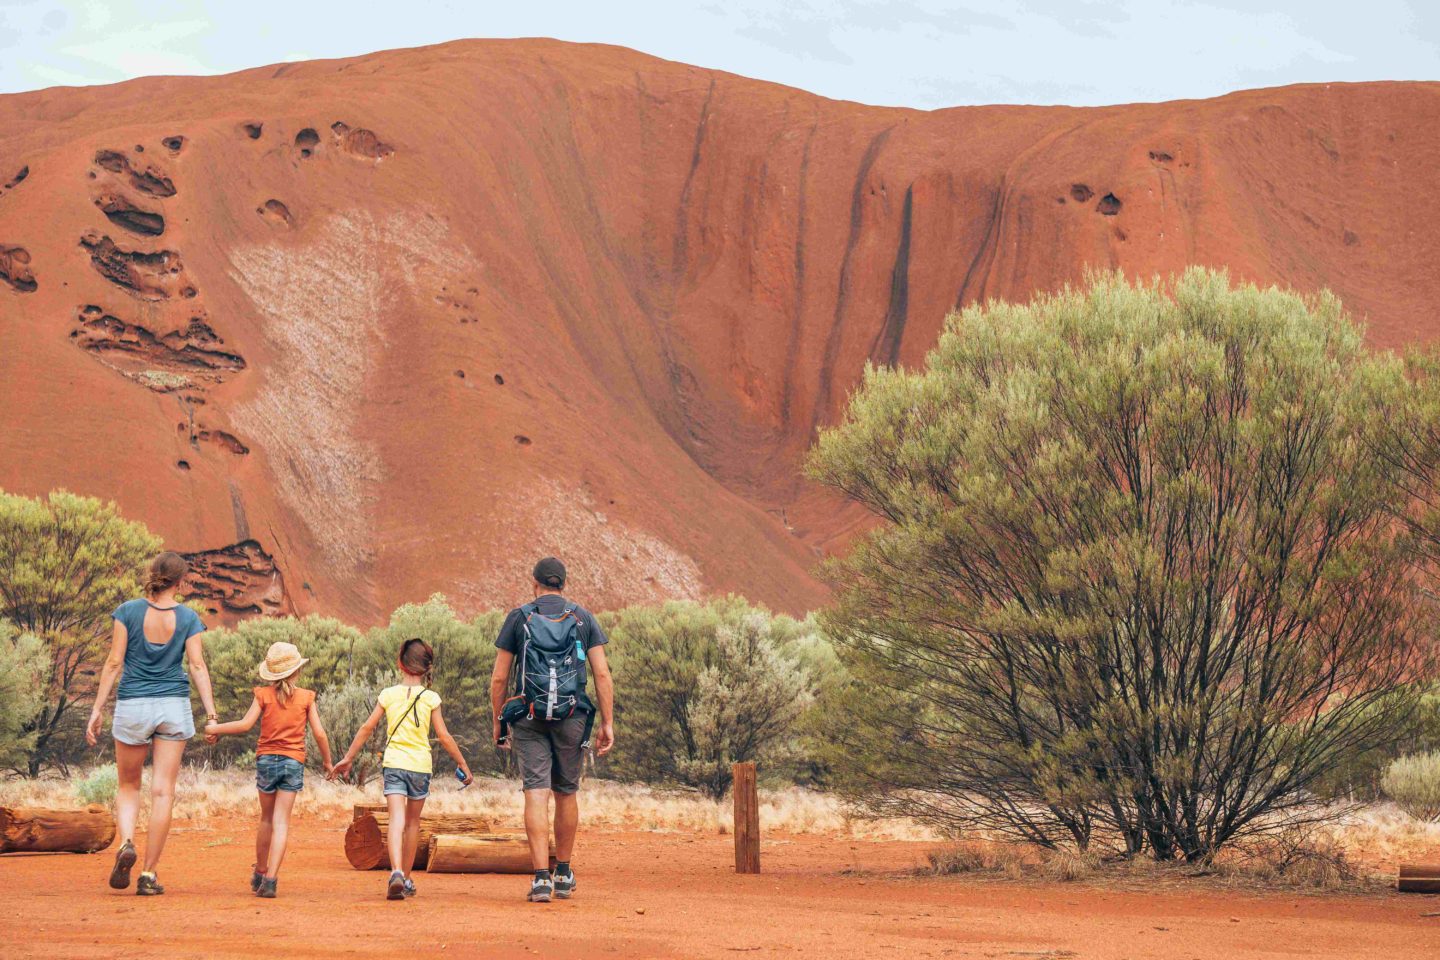 Family walking towards a large red rock formation in the Australian outback.